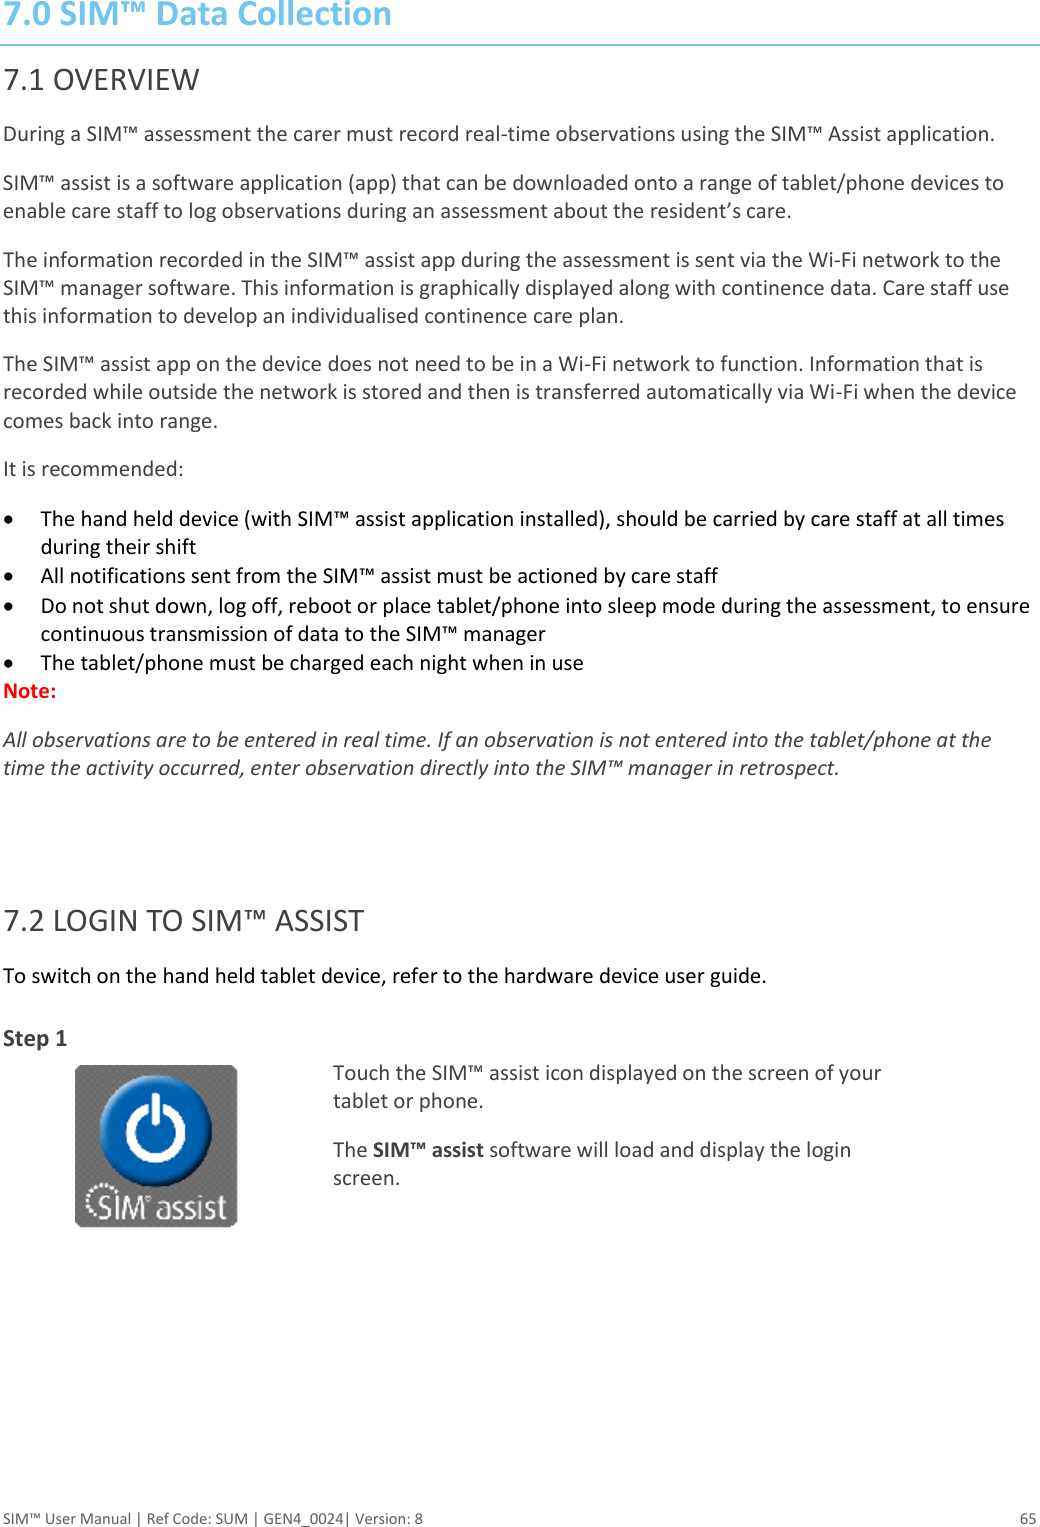  SIM™ User Manual | Ref Code: SUM | GEN4_0024| Version: 8  65  7.0 SIM™ Data Collection 7.1 OVERVIEW During a SIM™ assessment the carer must record real-time observations using the SIM™ Assist application. SIM™ assist is a software application (app) that can be downloaded onto a range of tablet/phone devices to enable care staff to log observations during an assessment about the resident’s care.  The information recorded in the SIM™ assist app during the assessment is sent via the Wi-Fi network to the SIM™ manager software. This information is graphically displayed along with continence data. Care staff use this information to develop an individualised continence care plan.  The SIM™ assist app on the device does not need to be in a Wi-Fi network to function. Information that is recorded while outside the network is stored and then is transferred automatically via Wi-Fi when the device comes back into range.  It is recommended:   The hand held device (with SIM™ assist application installed), should be carried by care staff at all times during their shift  All notifications sent from the SIM™ assist must be actioned by care staff  Do not shut down, log off, reboot or place tablet/phone into sleep mode during the assessment, to ensure continuous transmission of data to the SIM™ manager  The tablet/phone must be charged each night when in use Note:  All observations are to be entered in real time. If an observation is not entered into the tablet/phone at the time the activity occurred, enter observation directly into the SIM™ manager in retrospect.   7.2 LOGIN TO SIM™ ASSIST To switch on the hand held tablet device, refer to the hardware device user guide.  Step 1   Touch the SIM™ assist icon displayed on the screen of your tablet or phone. The SIM™ assist software will load and display the login screen.       